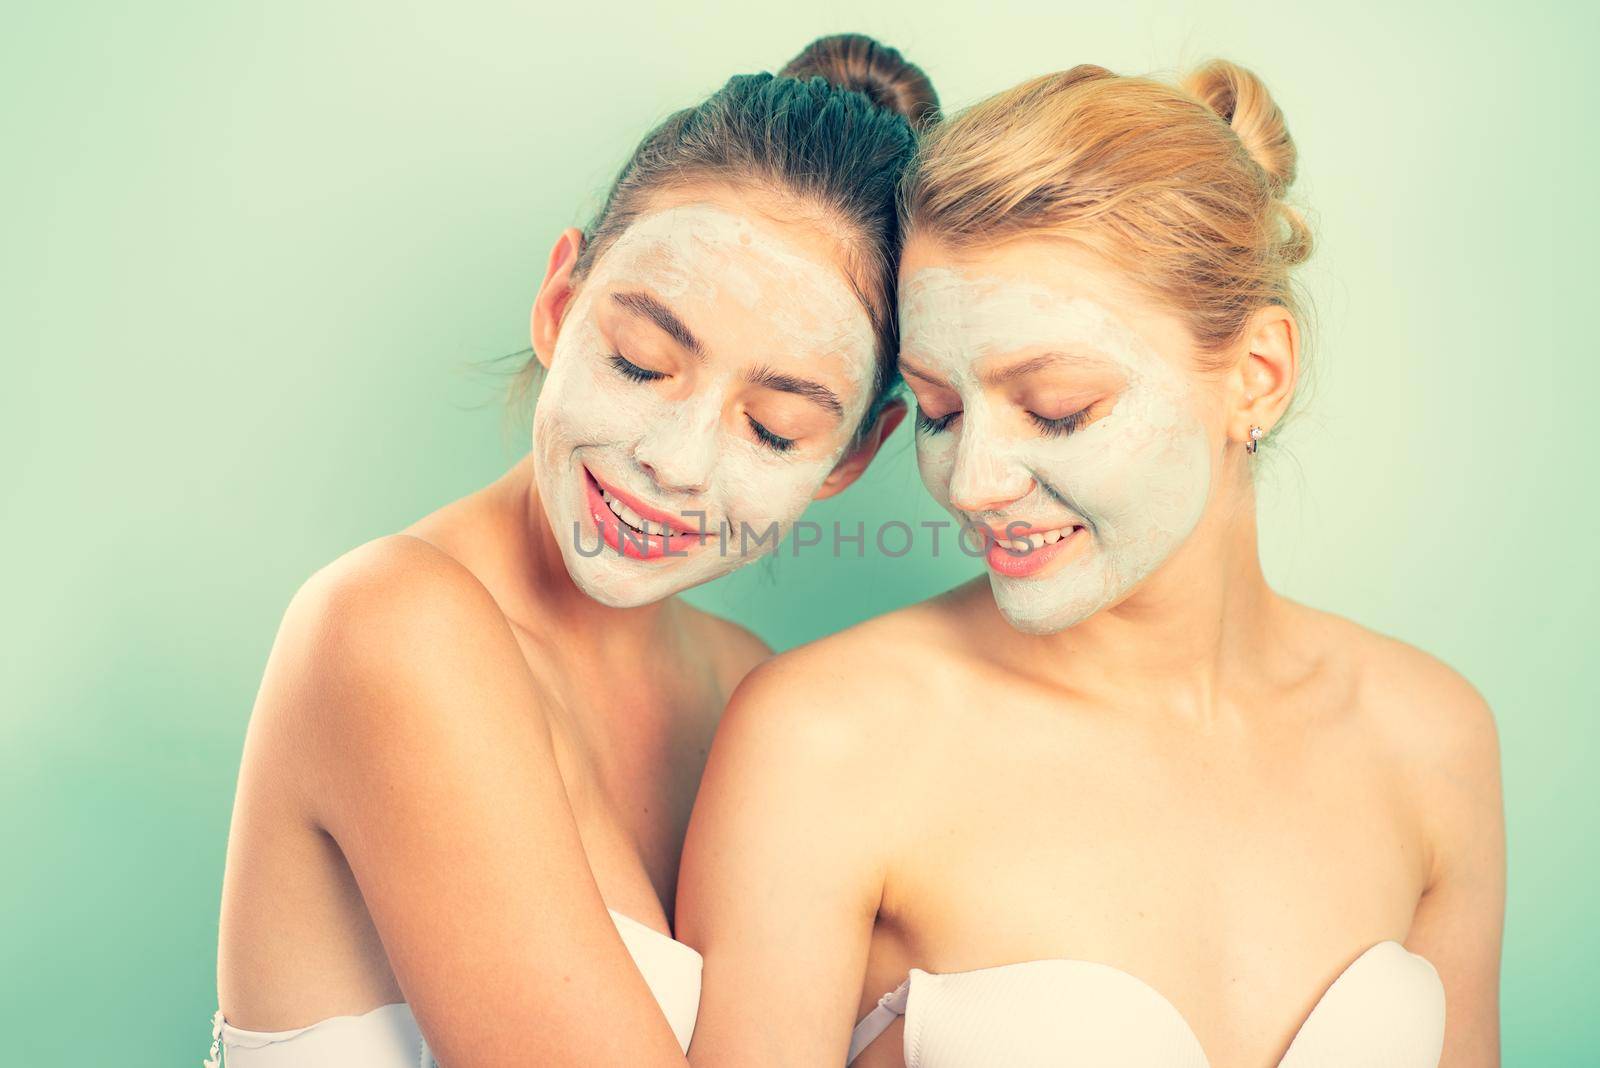 Beautiful girls best friends forever with bare shoulders apply organic clay mask and smile. Blond and dark hair women make skin care. Beautiful girl take care about skin health and beauty